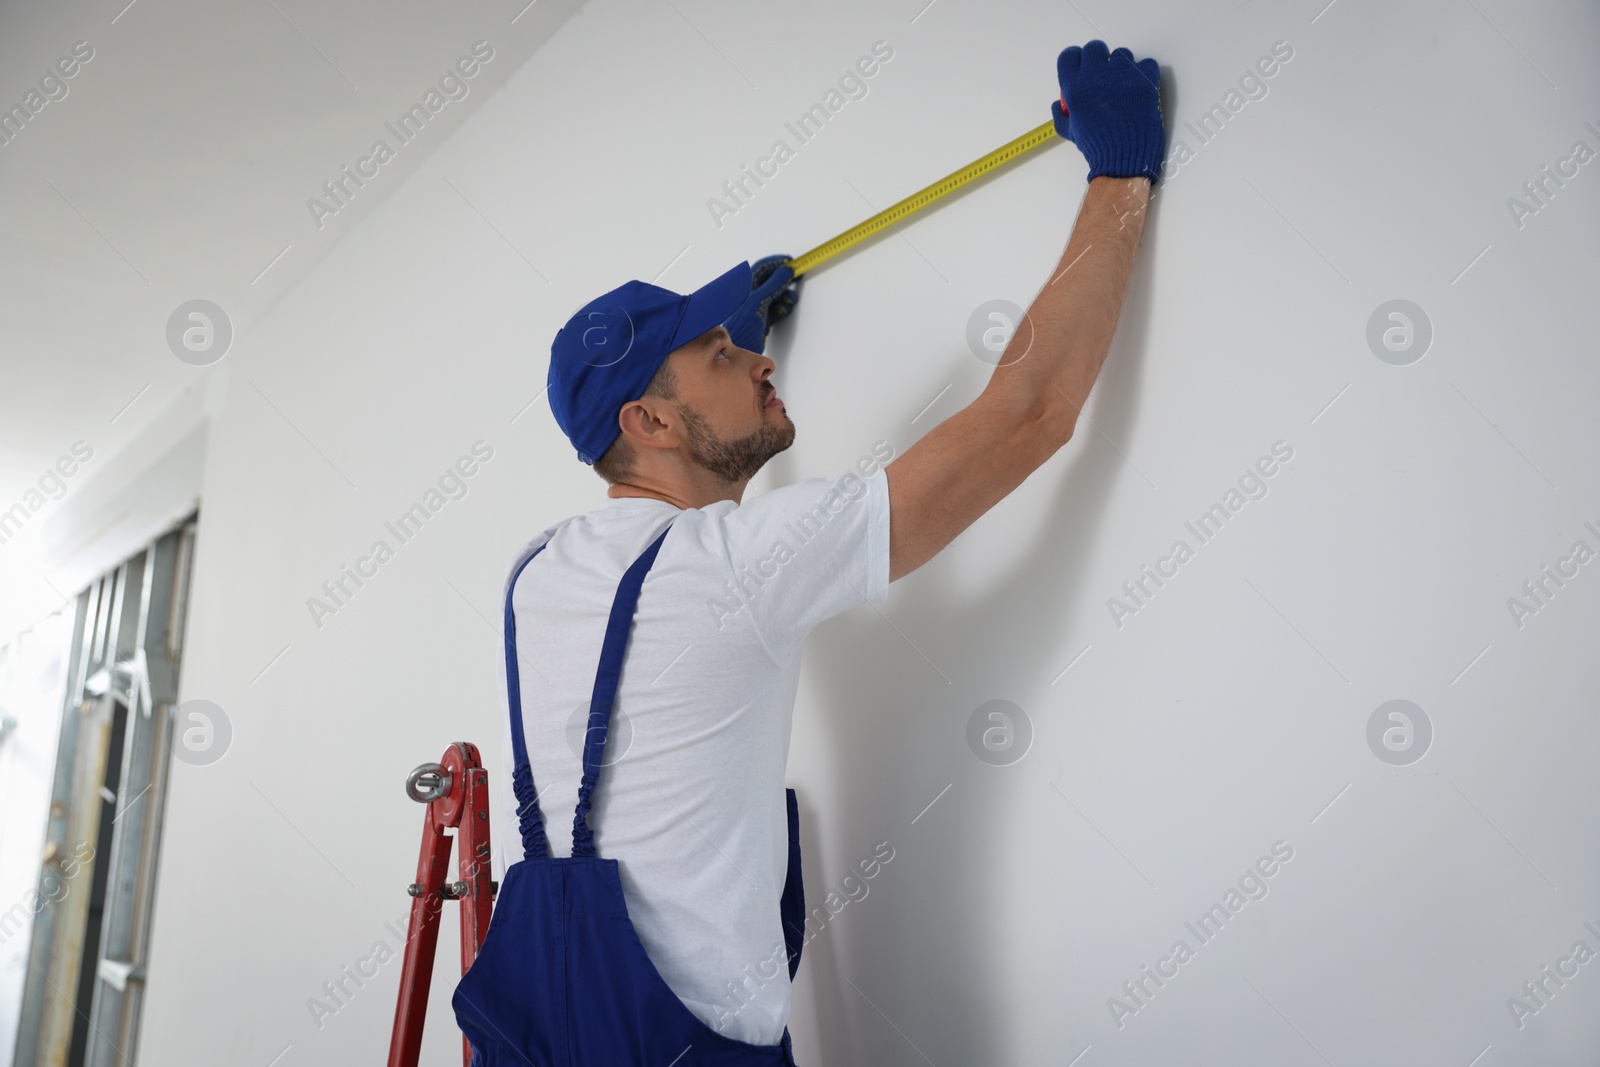 Photo of Construction worker using measuring tape in room prepared for renovation